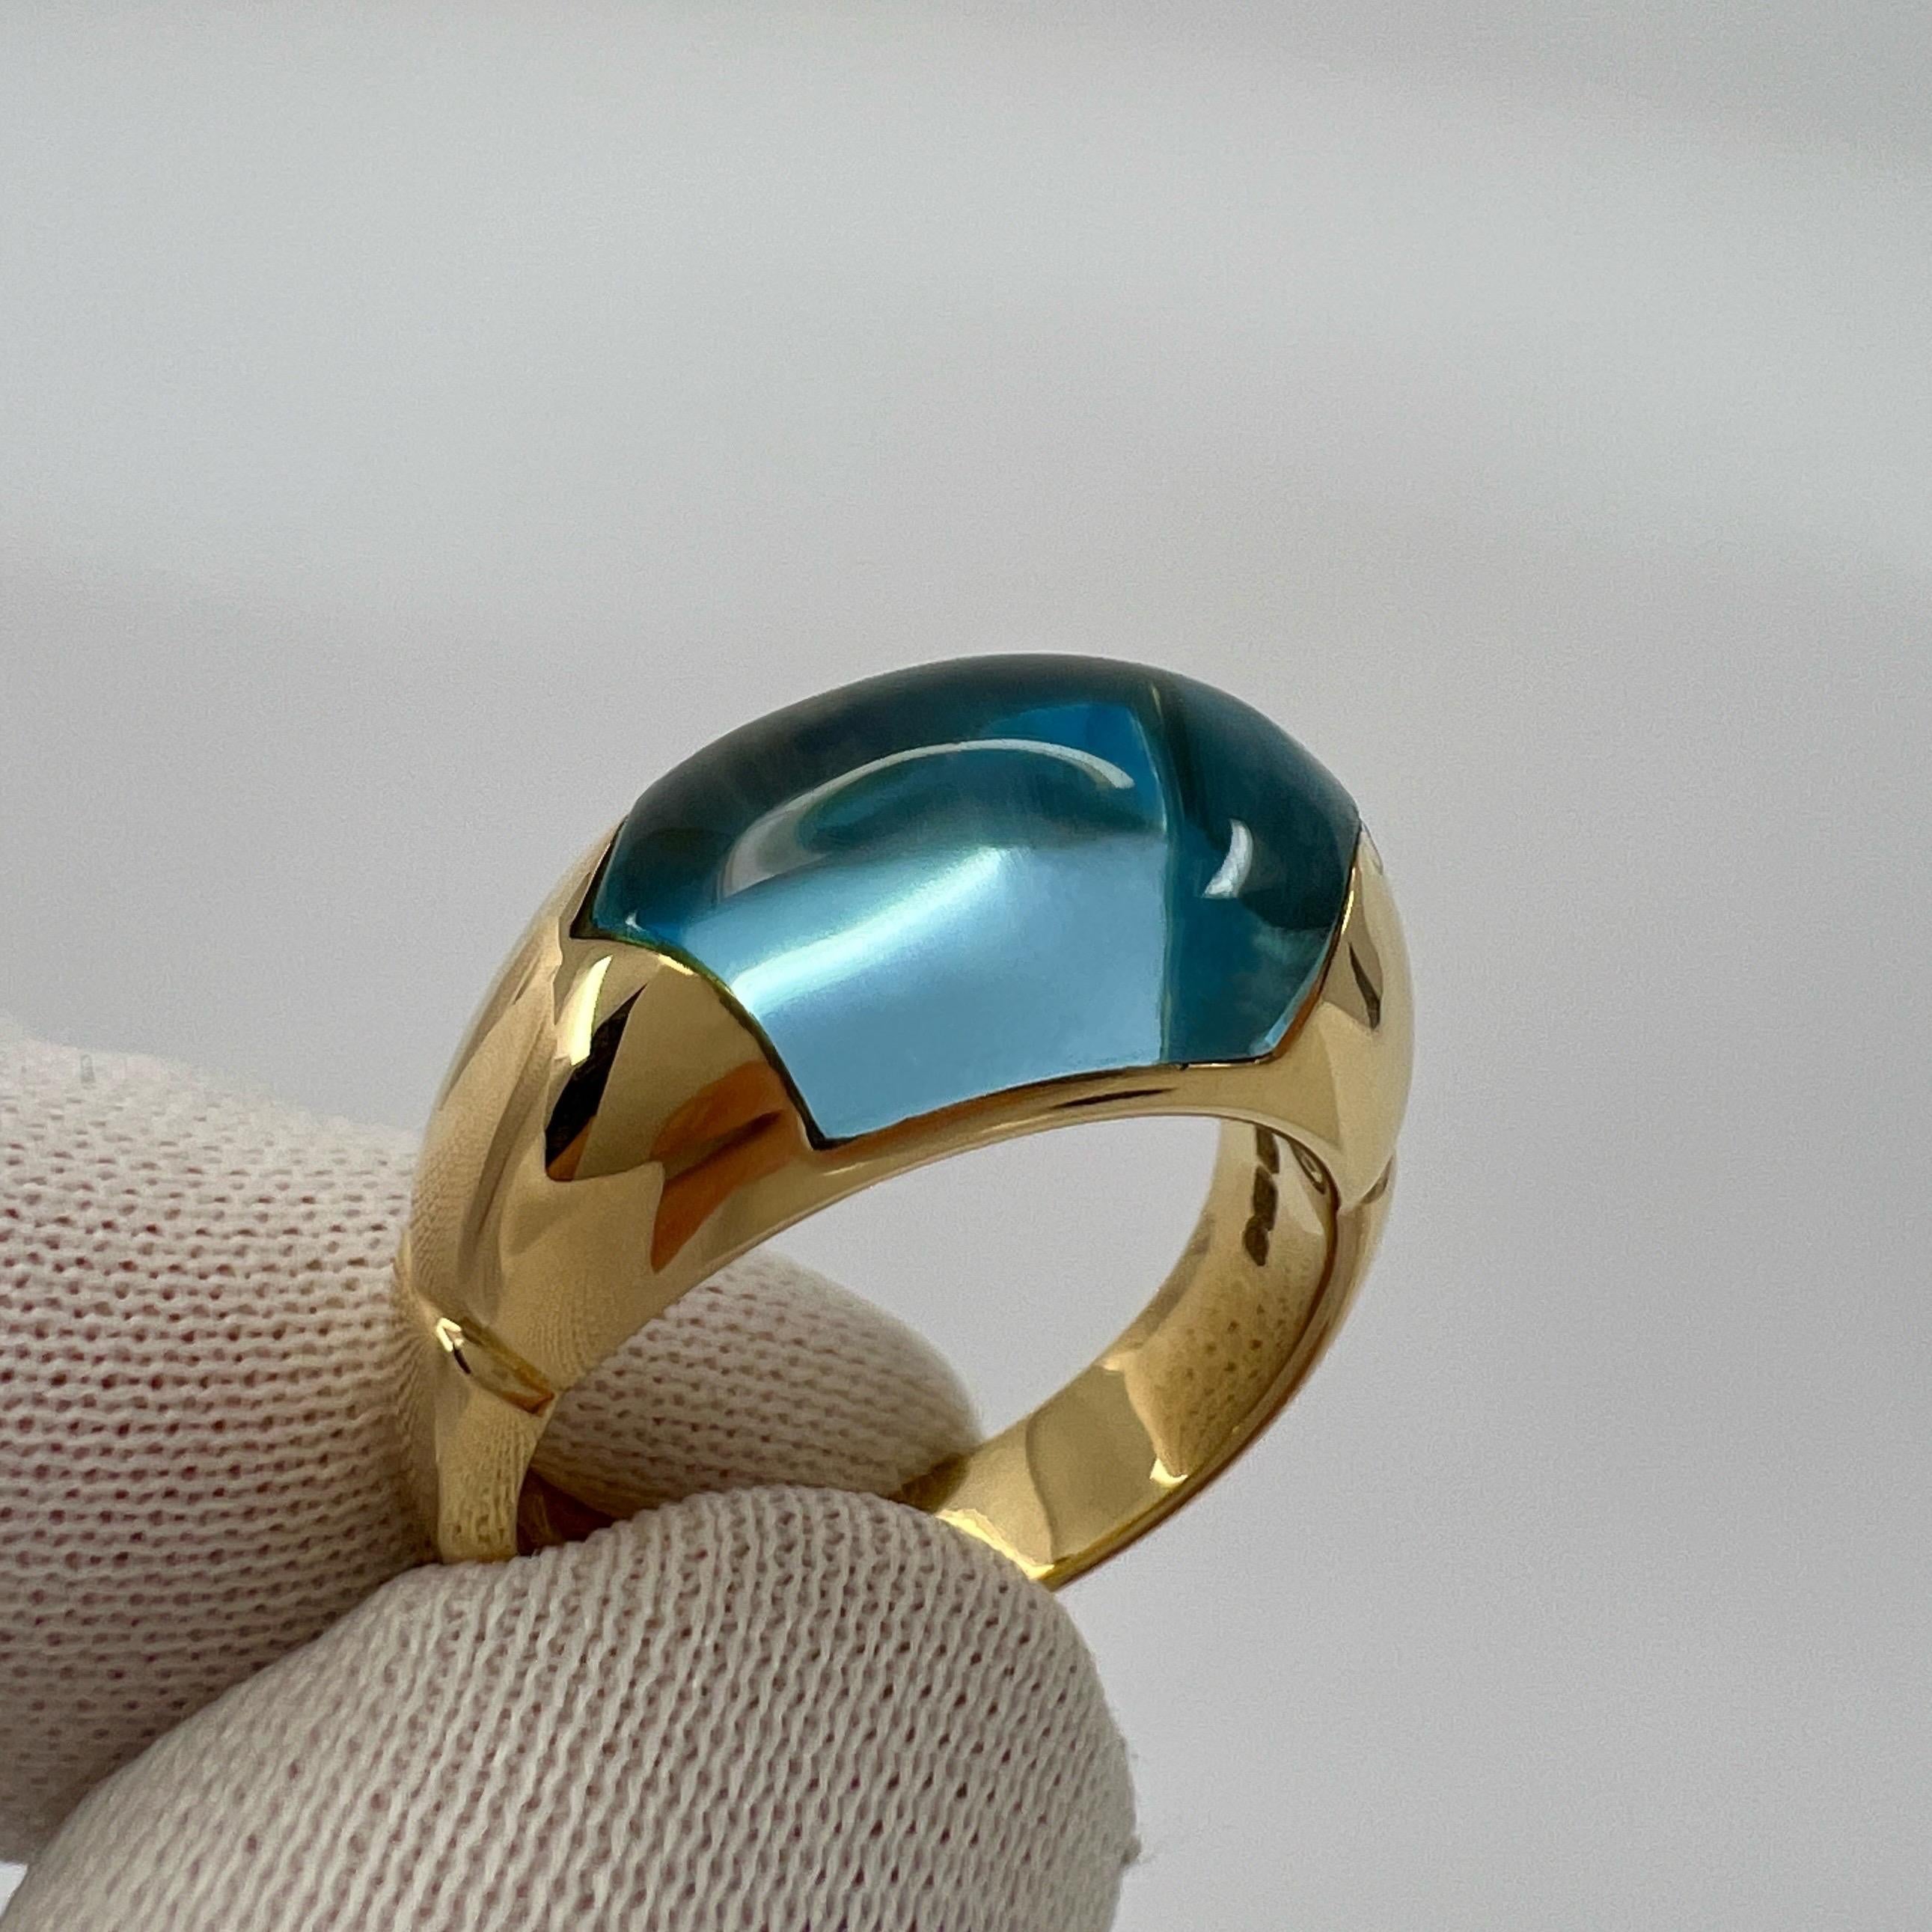 Rare Vintage Bvlgari Certica 18k Yellow Gold Blue Topaz Dome Ring with Box 7